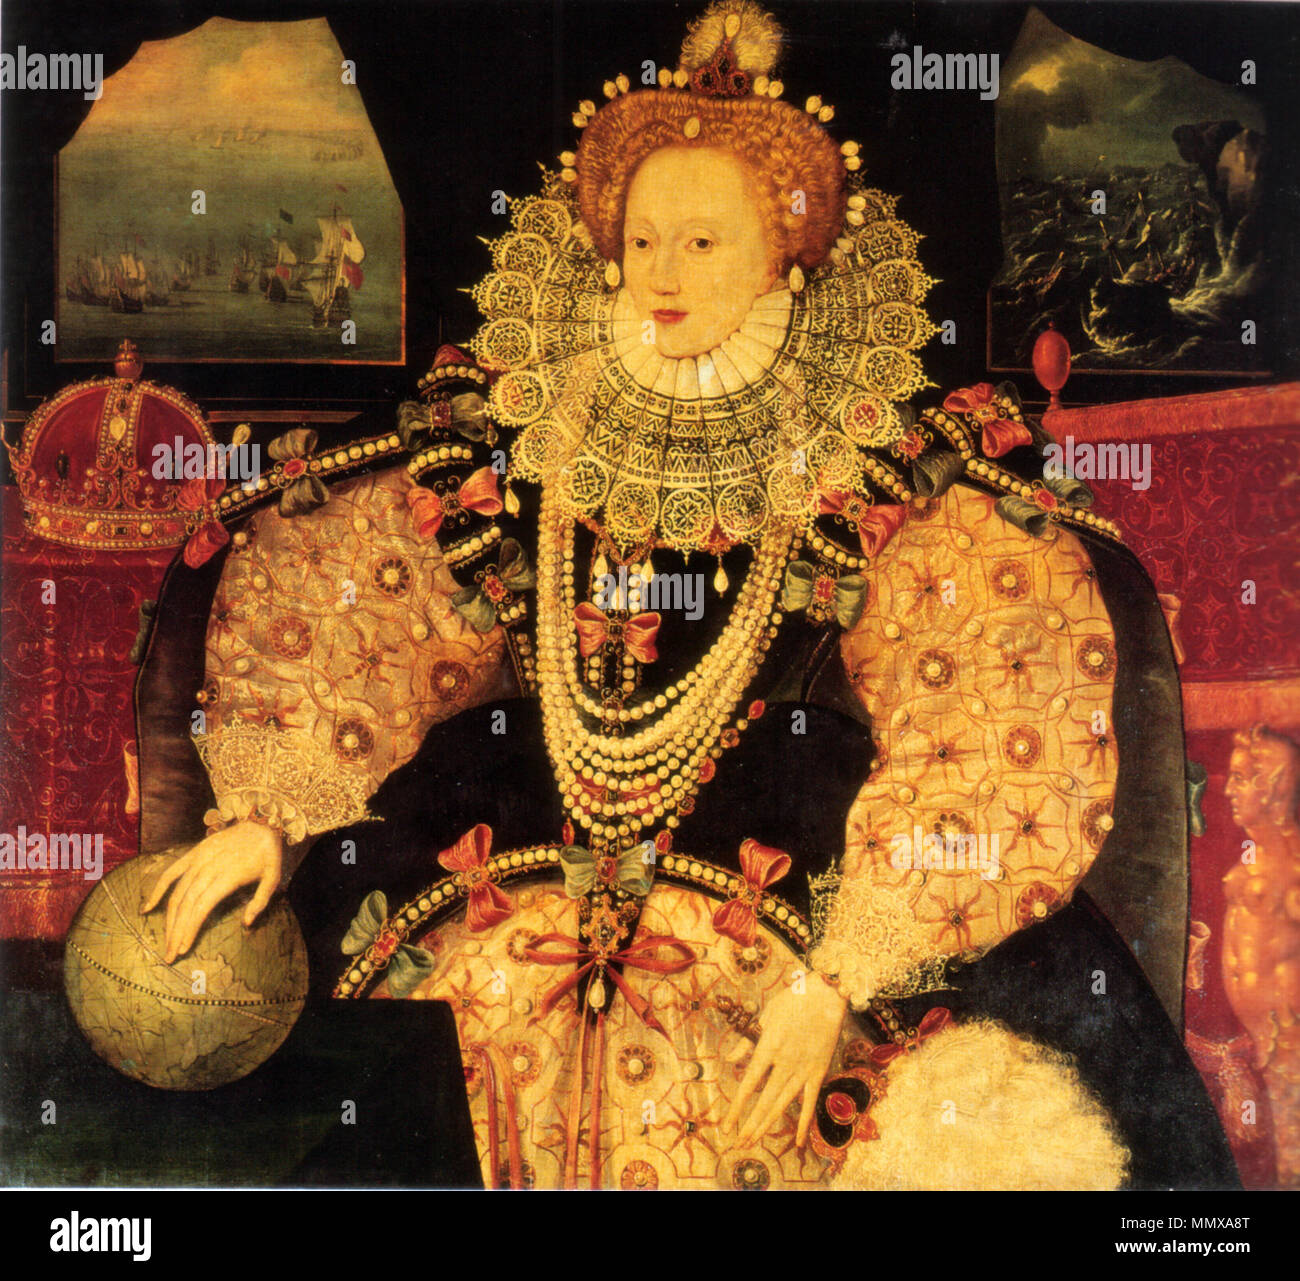 . Elizabeth I of England, the Armada Portrait, possibly commissioned by Sir Francis Drake. Oil on panel, 110.5 x 127 cm (43½ x 50 in.). Other versions of the Armada portrait are by different artists.  . circa 1588. Unknown artist, British School Elizabeth I Armada Portrait British School Stock Photo